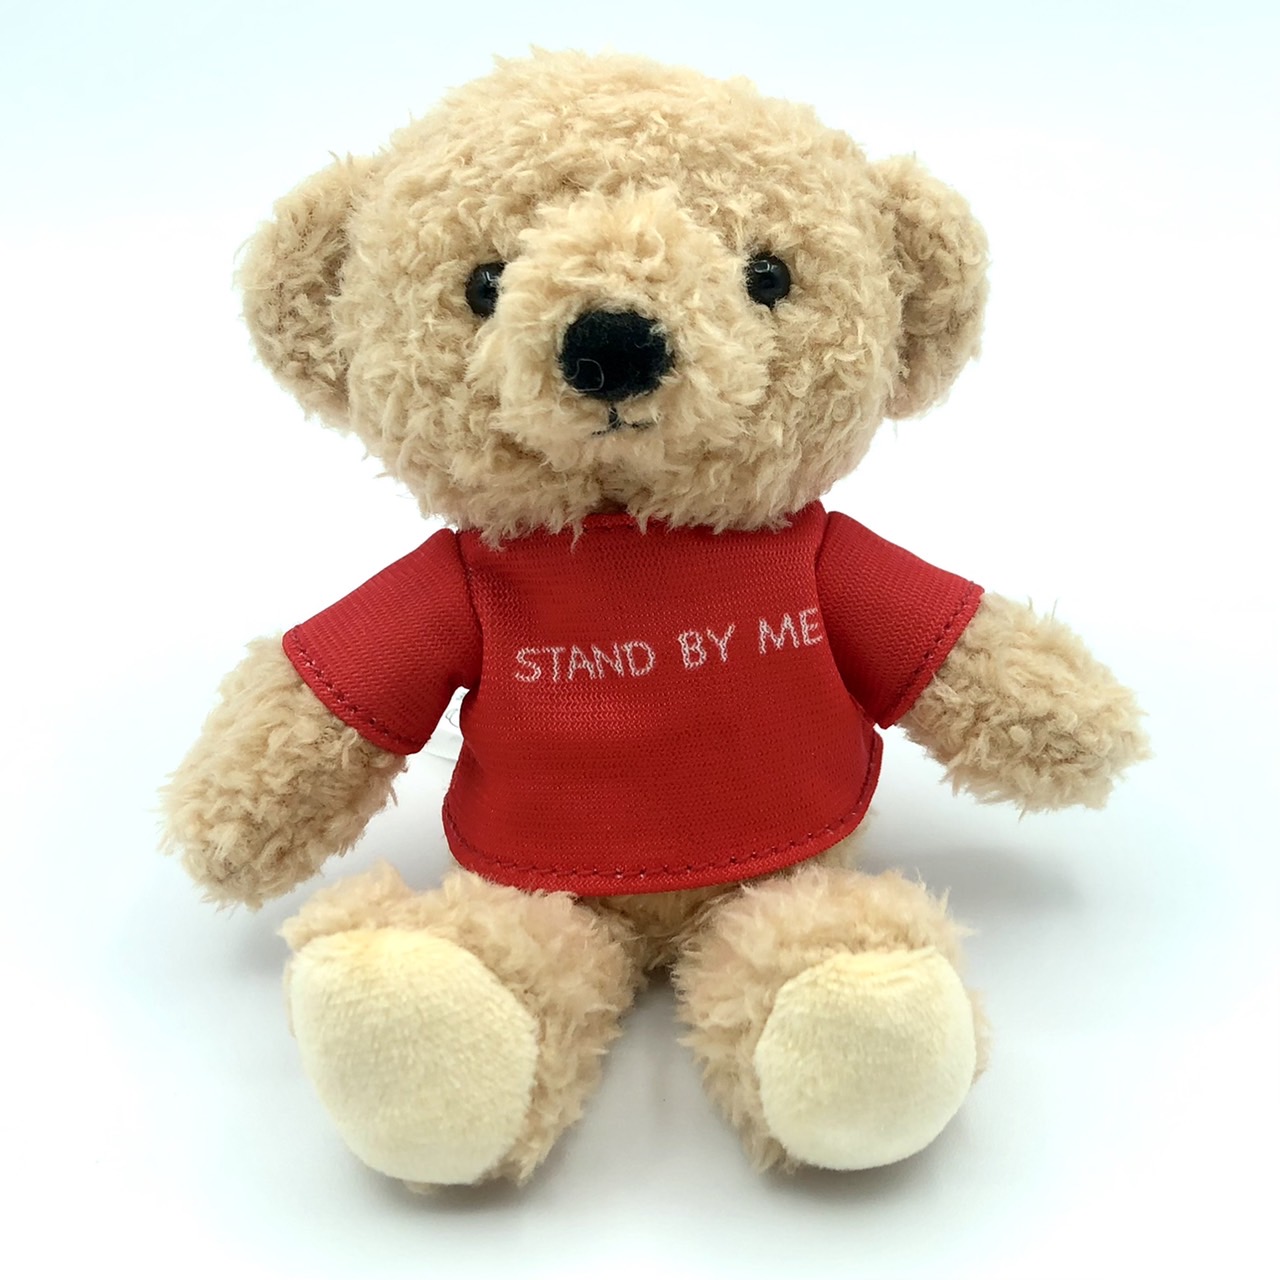 Stand by me bear SBMB001